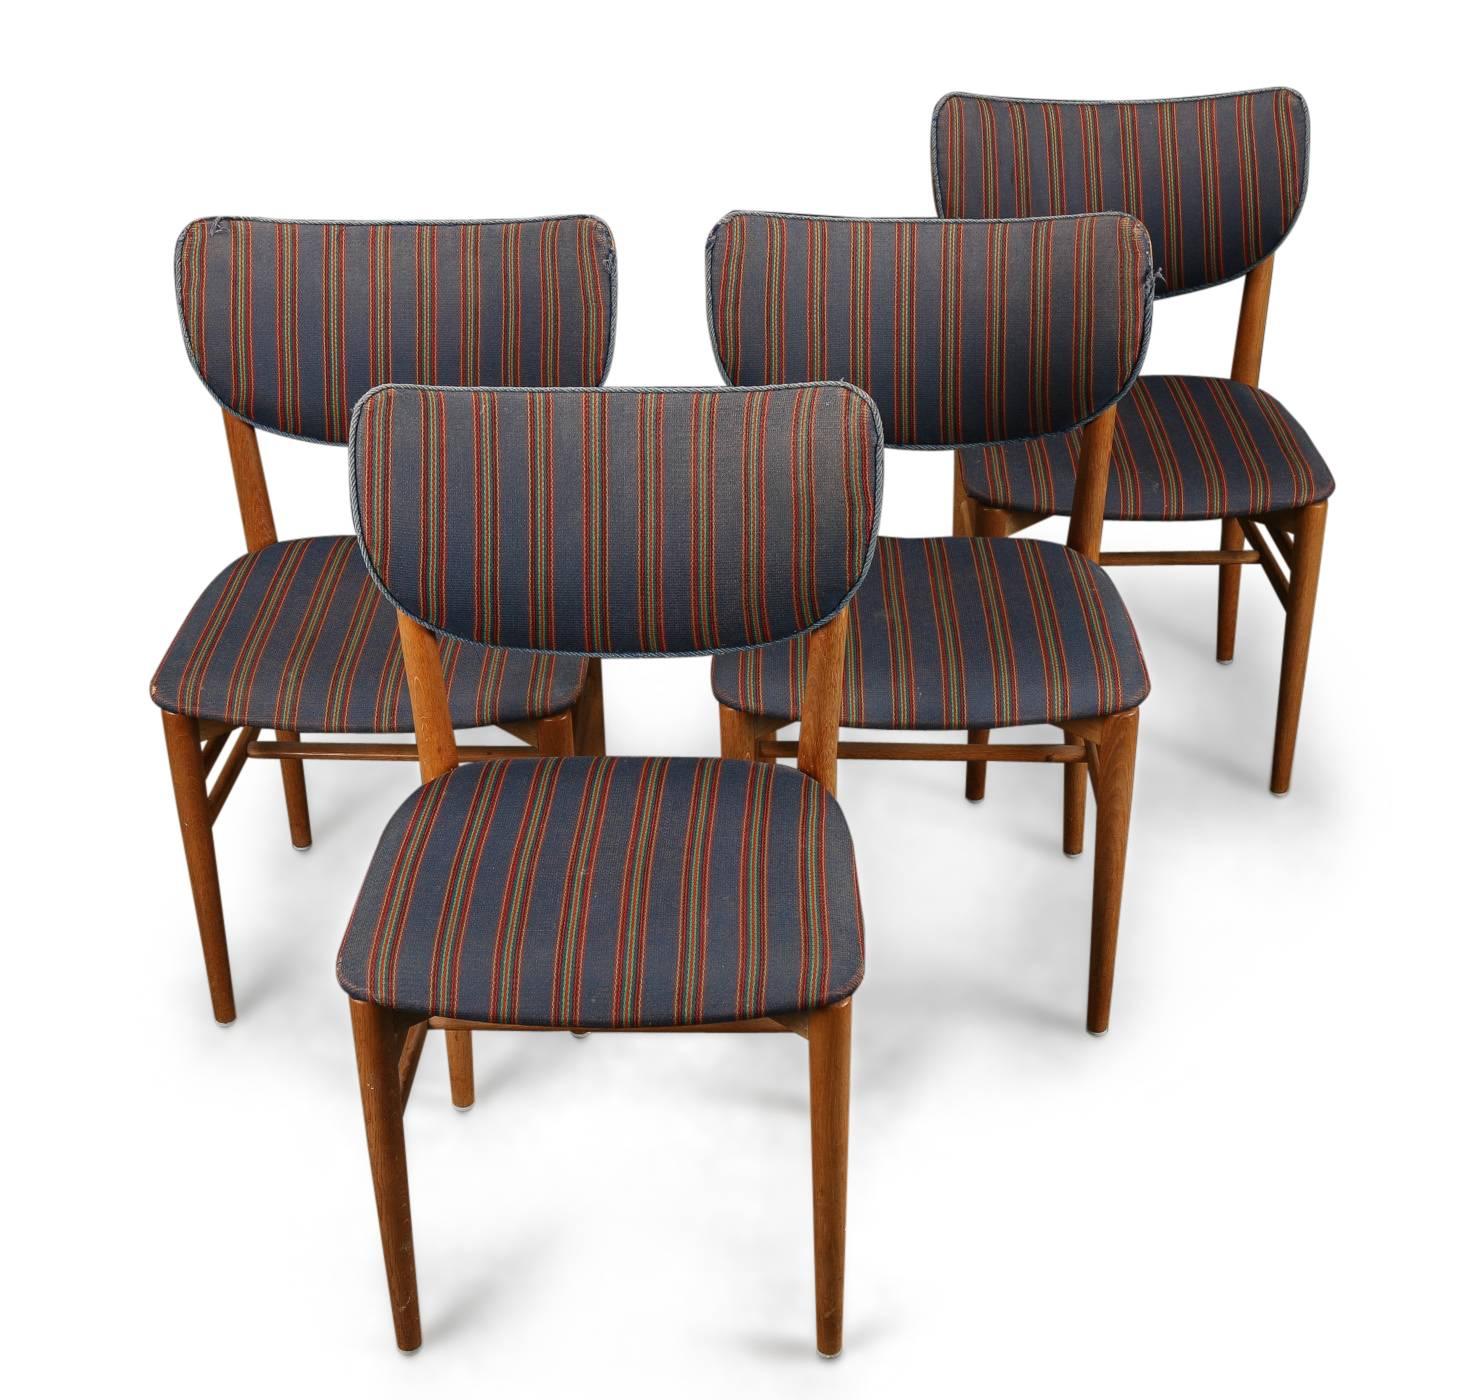 Four Niels Koppel chairs with oak frame, seat and back upholstered with wool and covered with striped fabric, teak backrest with a seat height of 45 cm.
Made by Slagelse Møbelfabrik, 1950s. Presence of wear due to use, stains and some minor